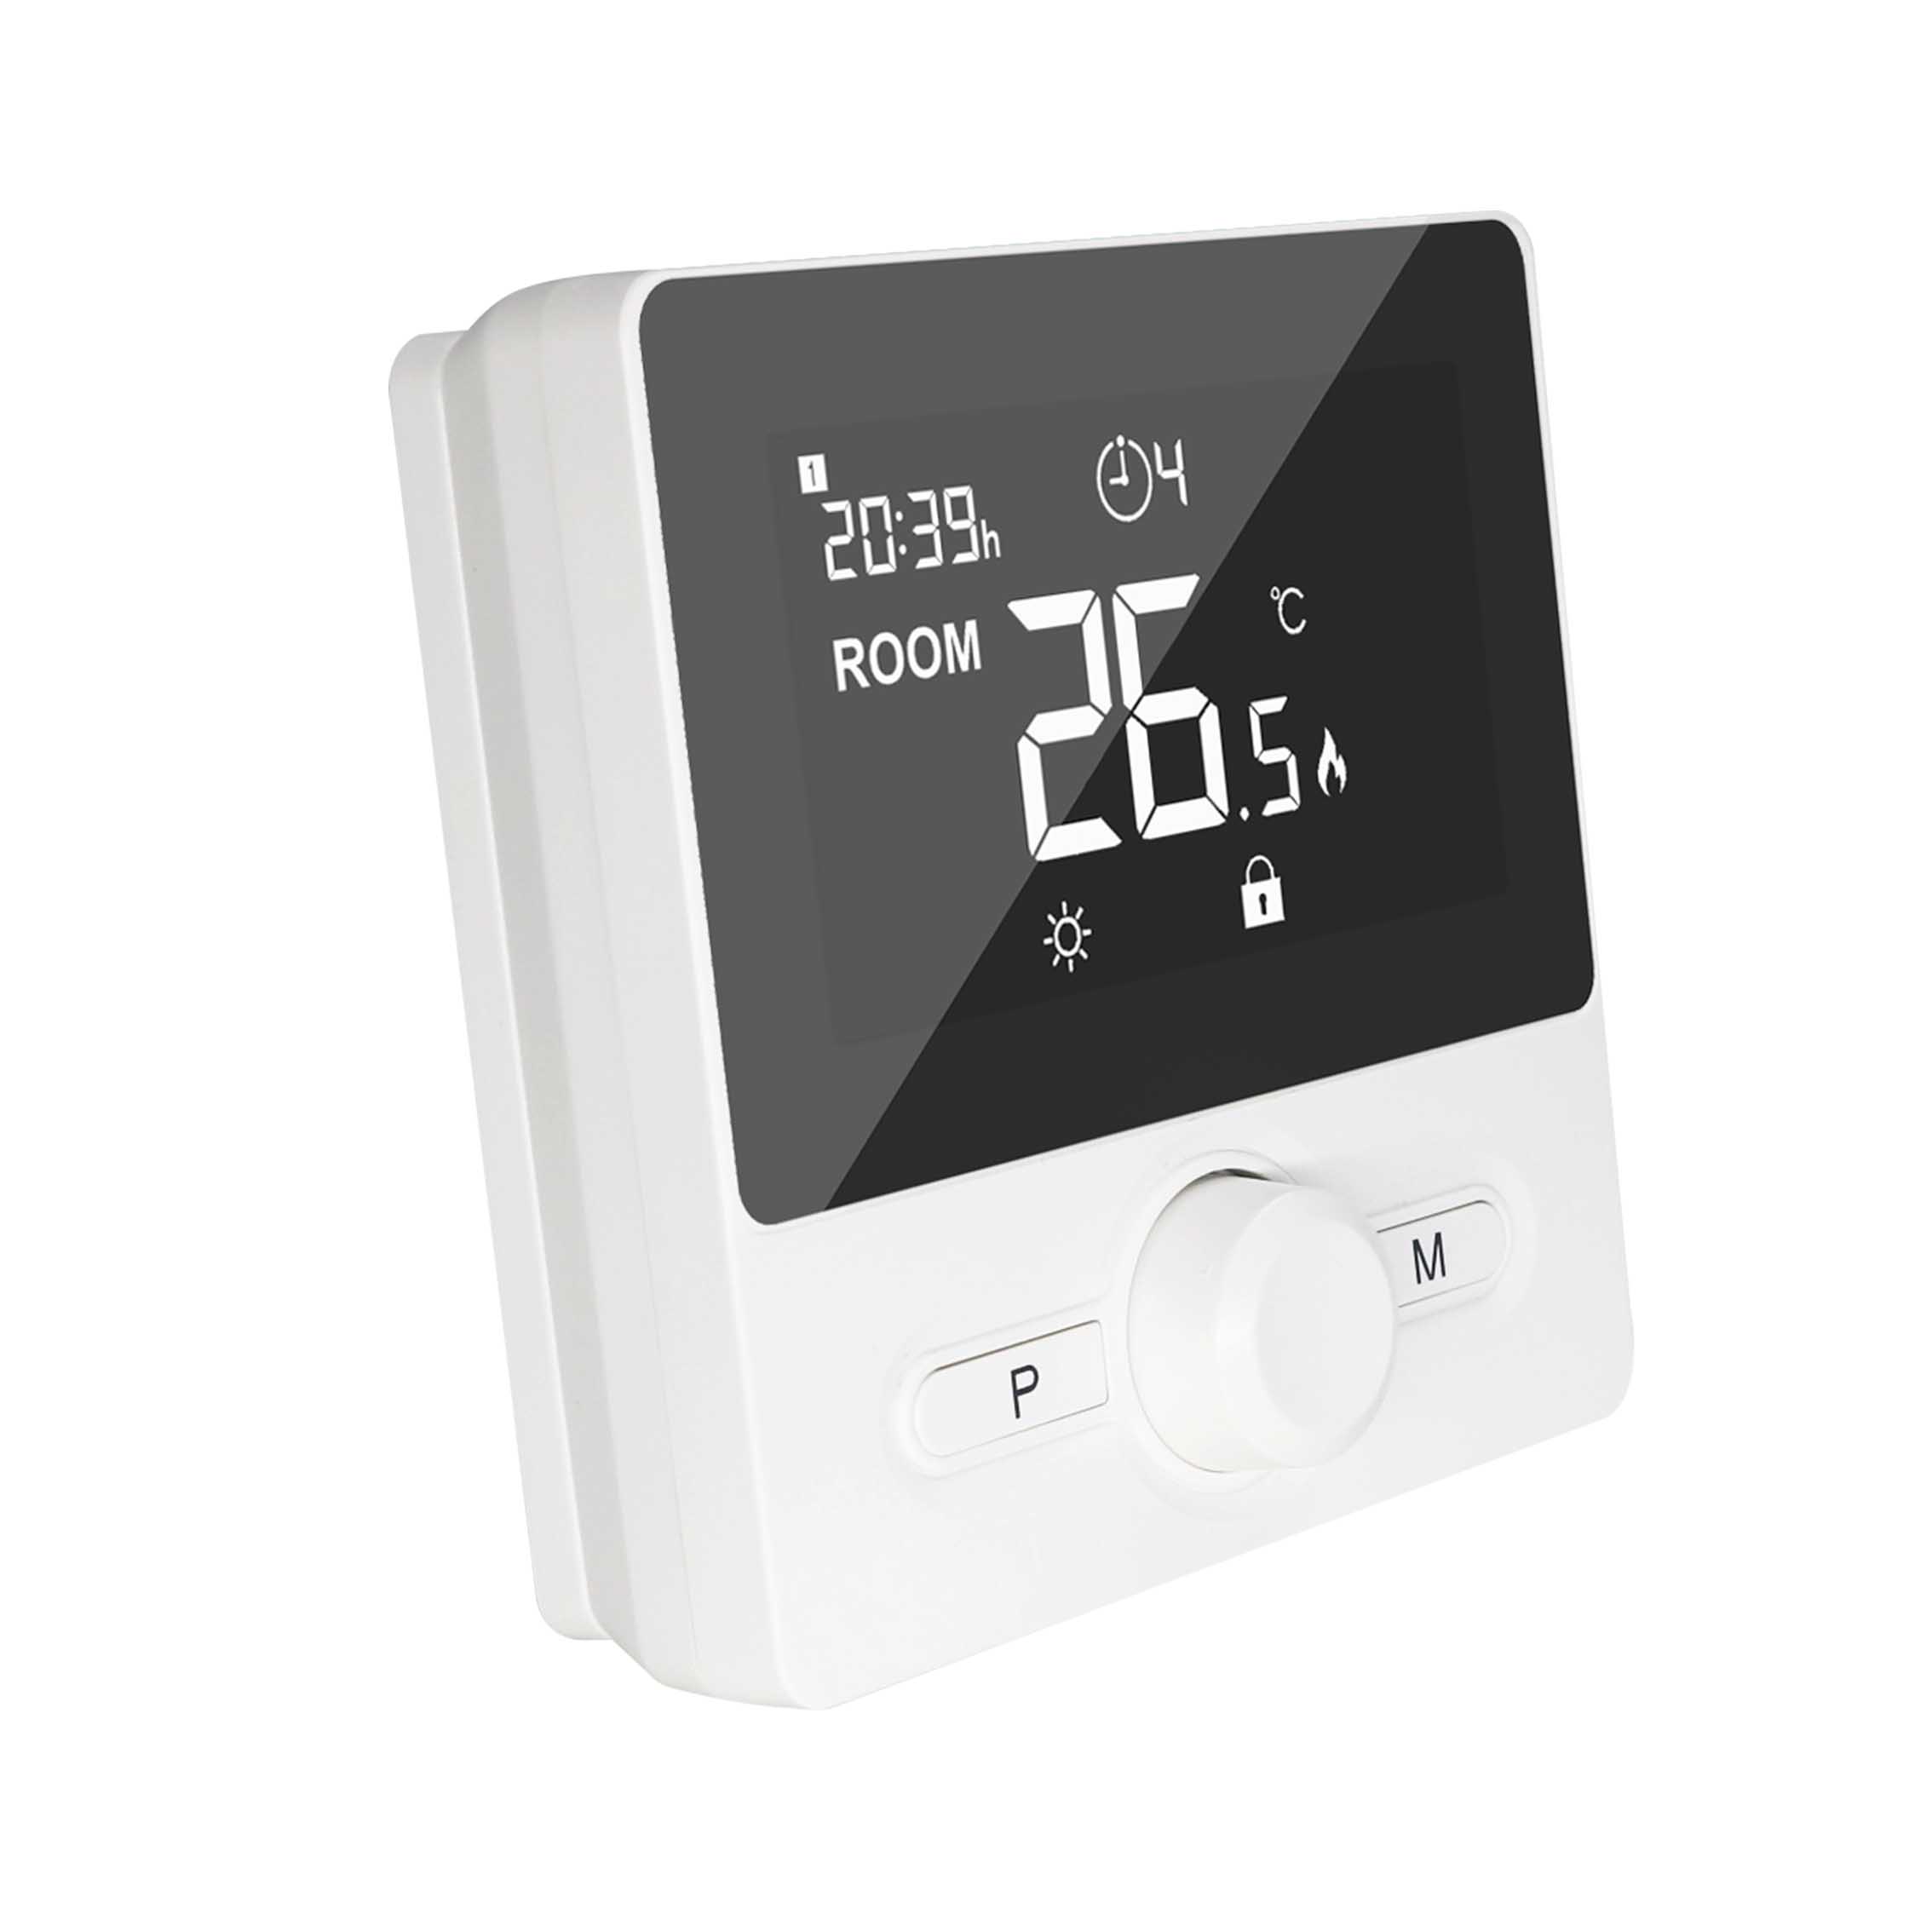 7days Programmable Digital Wireless Heating and Cooling Thermostat